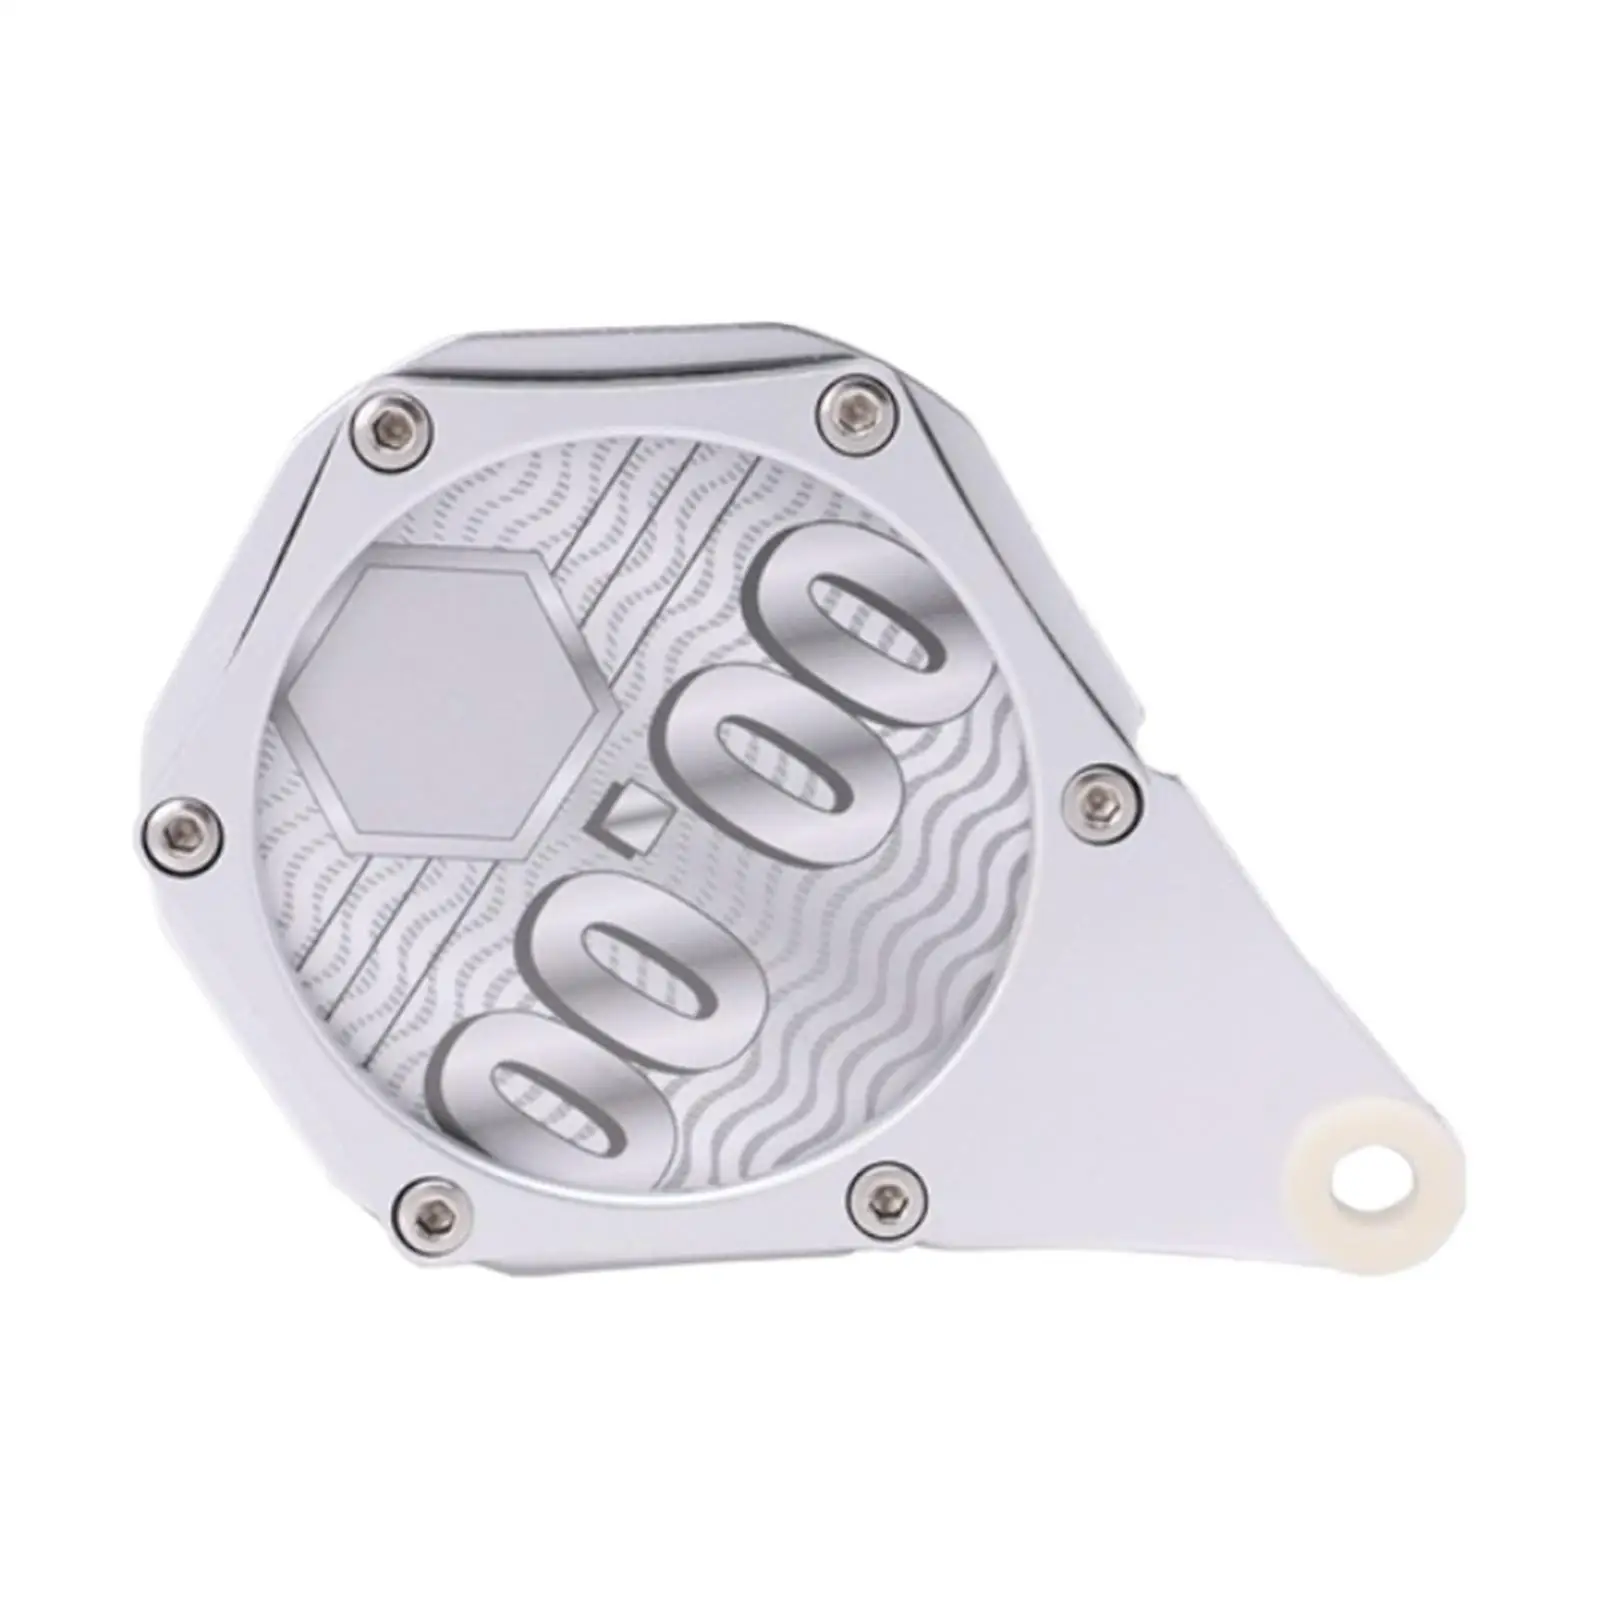 Hexagon Tax Disc Plate Tax Disc Holder for Bike Motor Easy to Mount